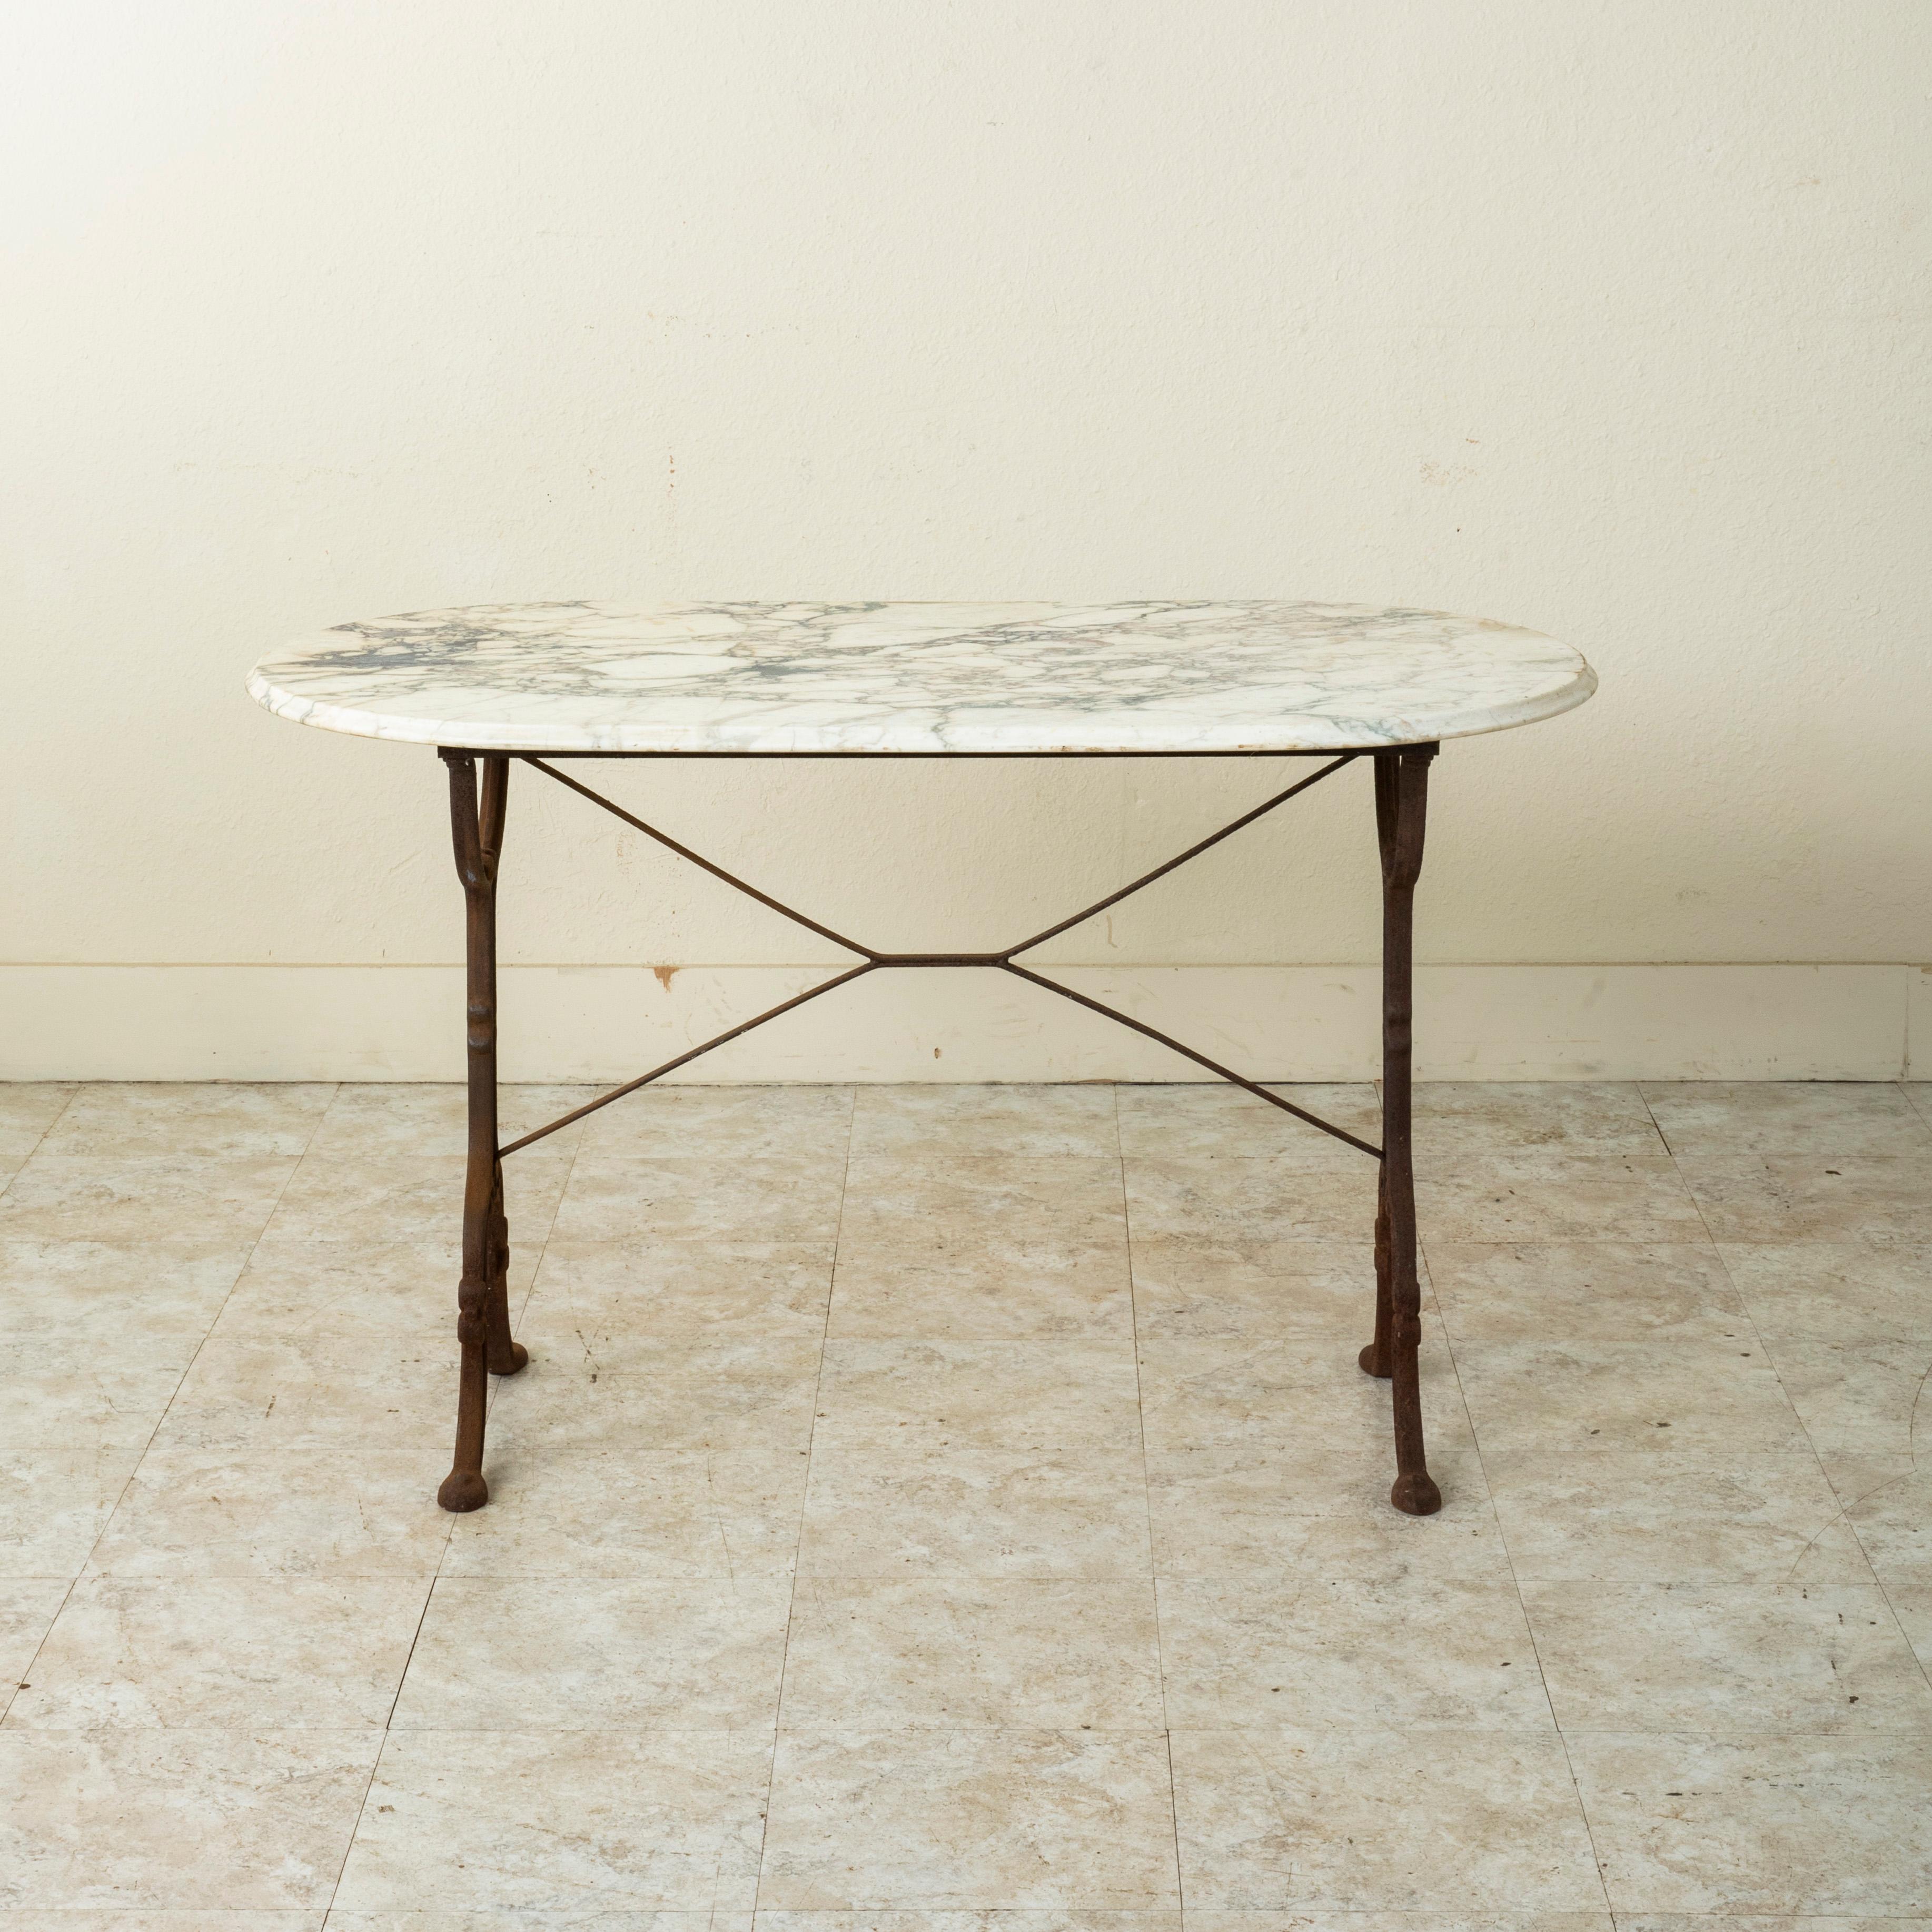 Originally used in a French brasserie from the turn of the twentieth century, this cast iron bistro table or cafe table features a solid beveled white marble top. Scrolled iron legs support the top and are joined by an X-stretcher that provides